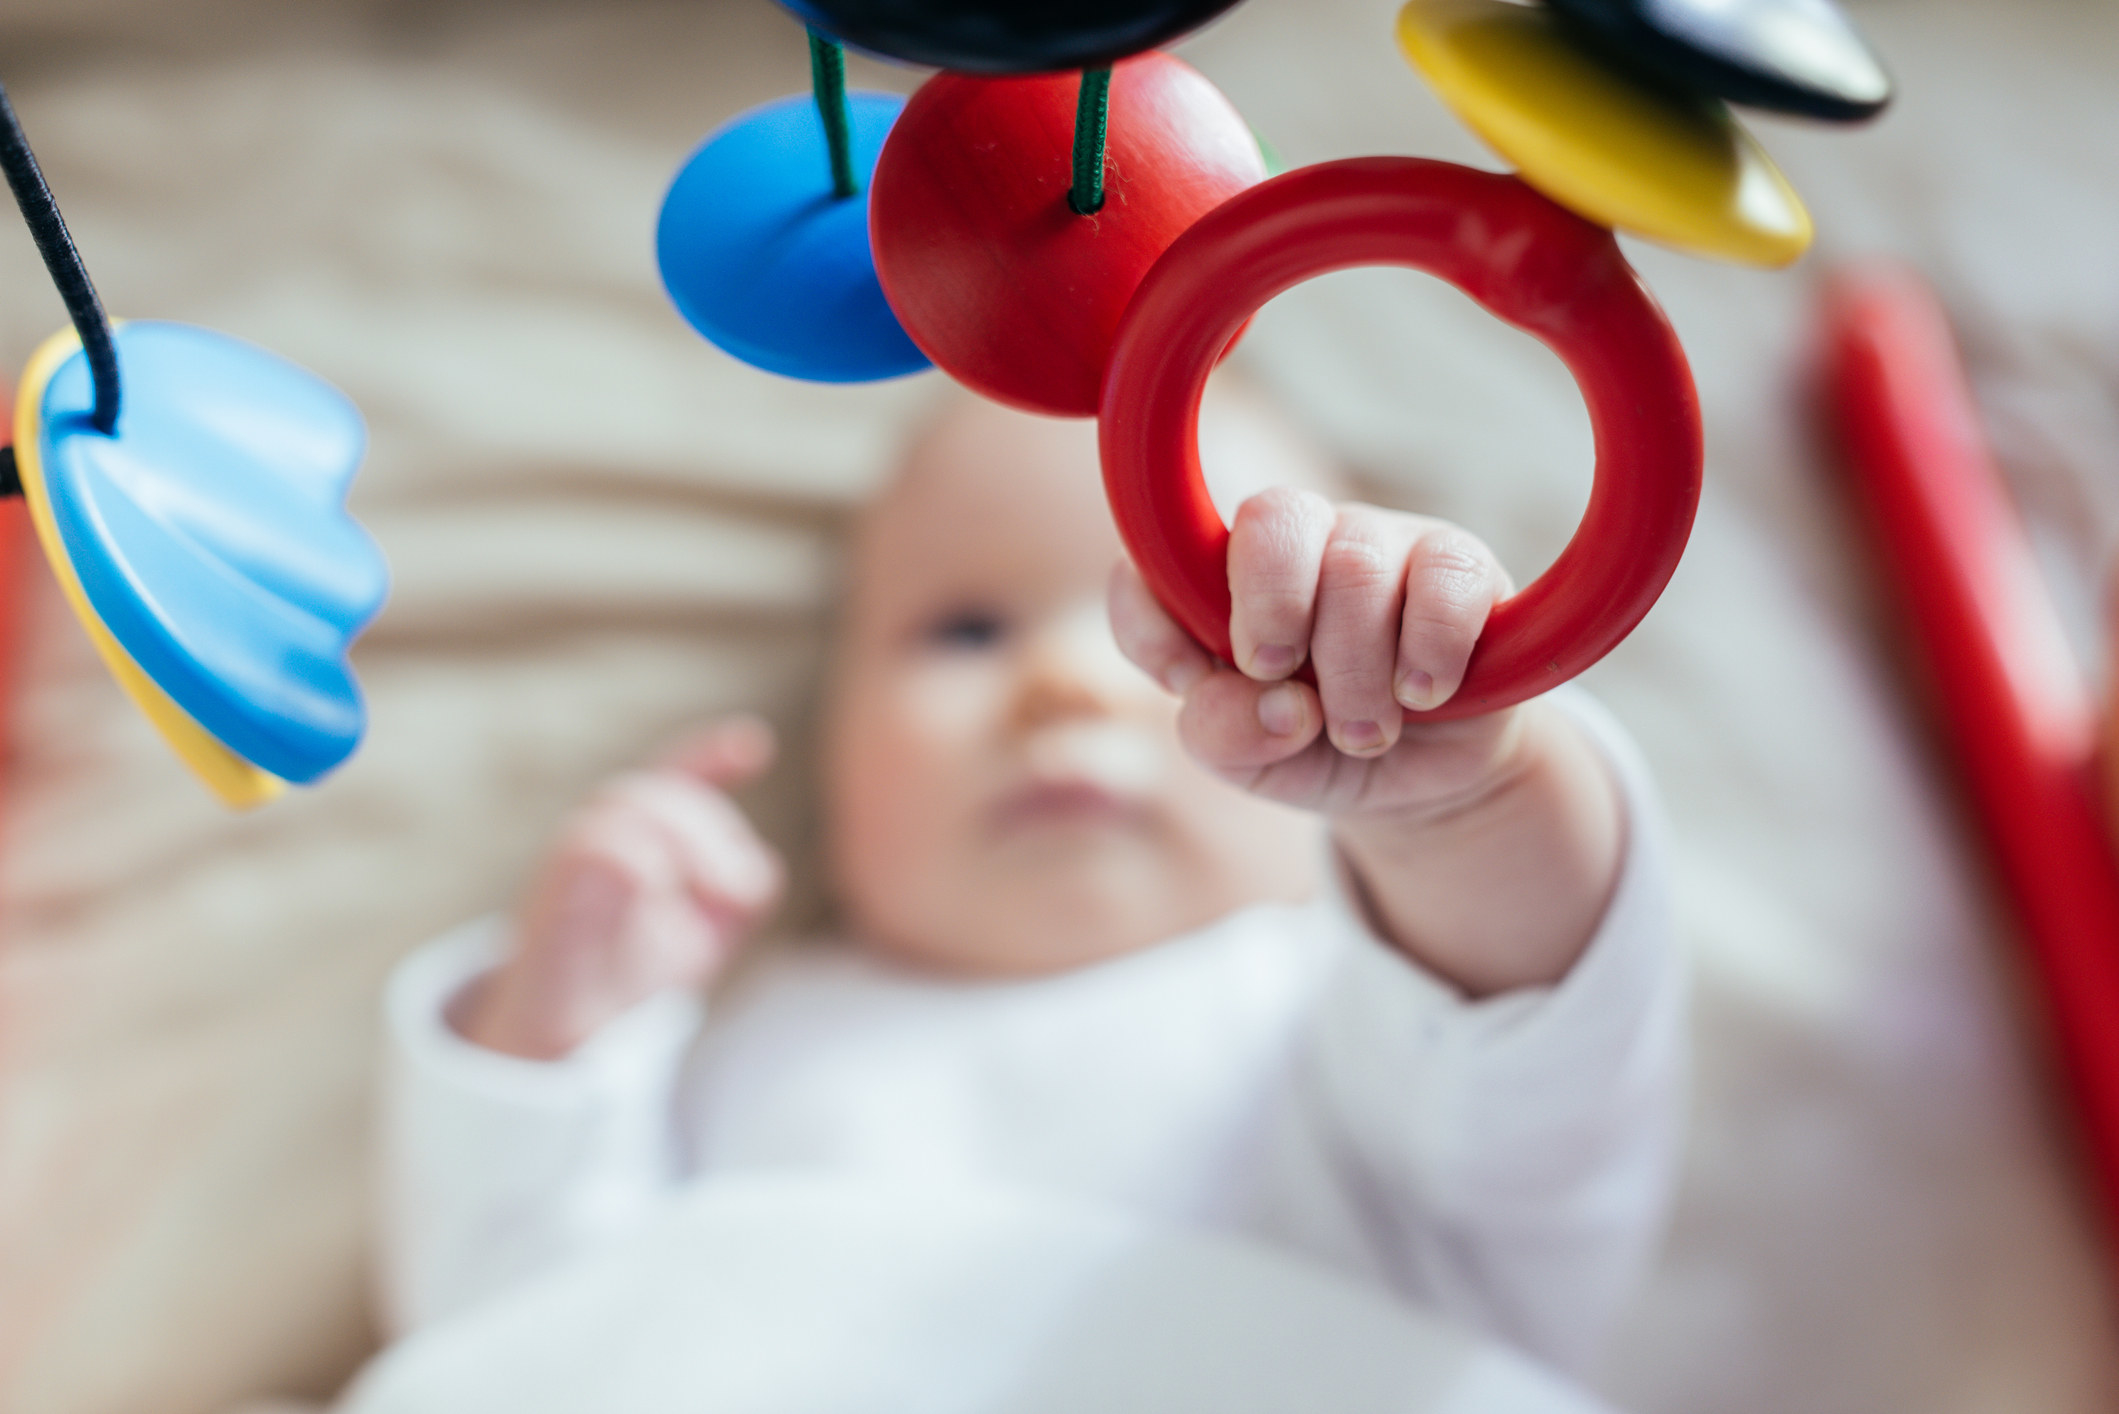 Baby reaching for toy